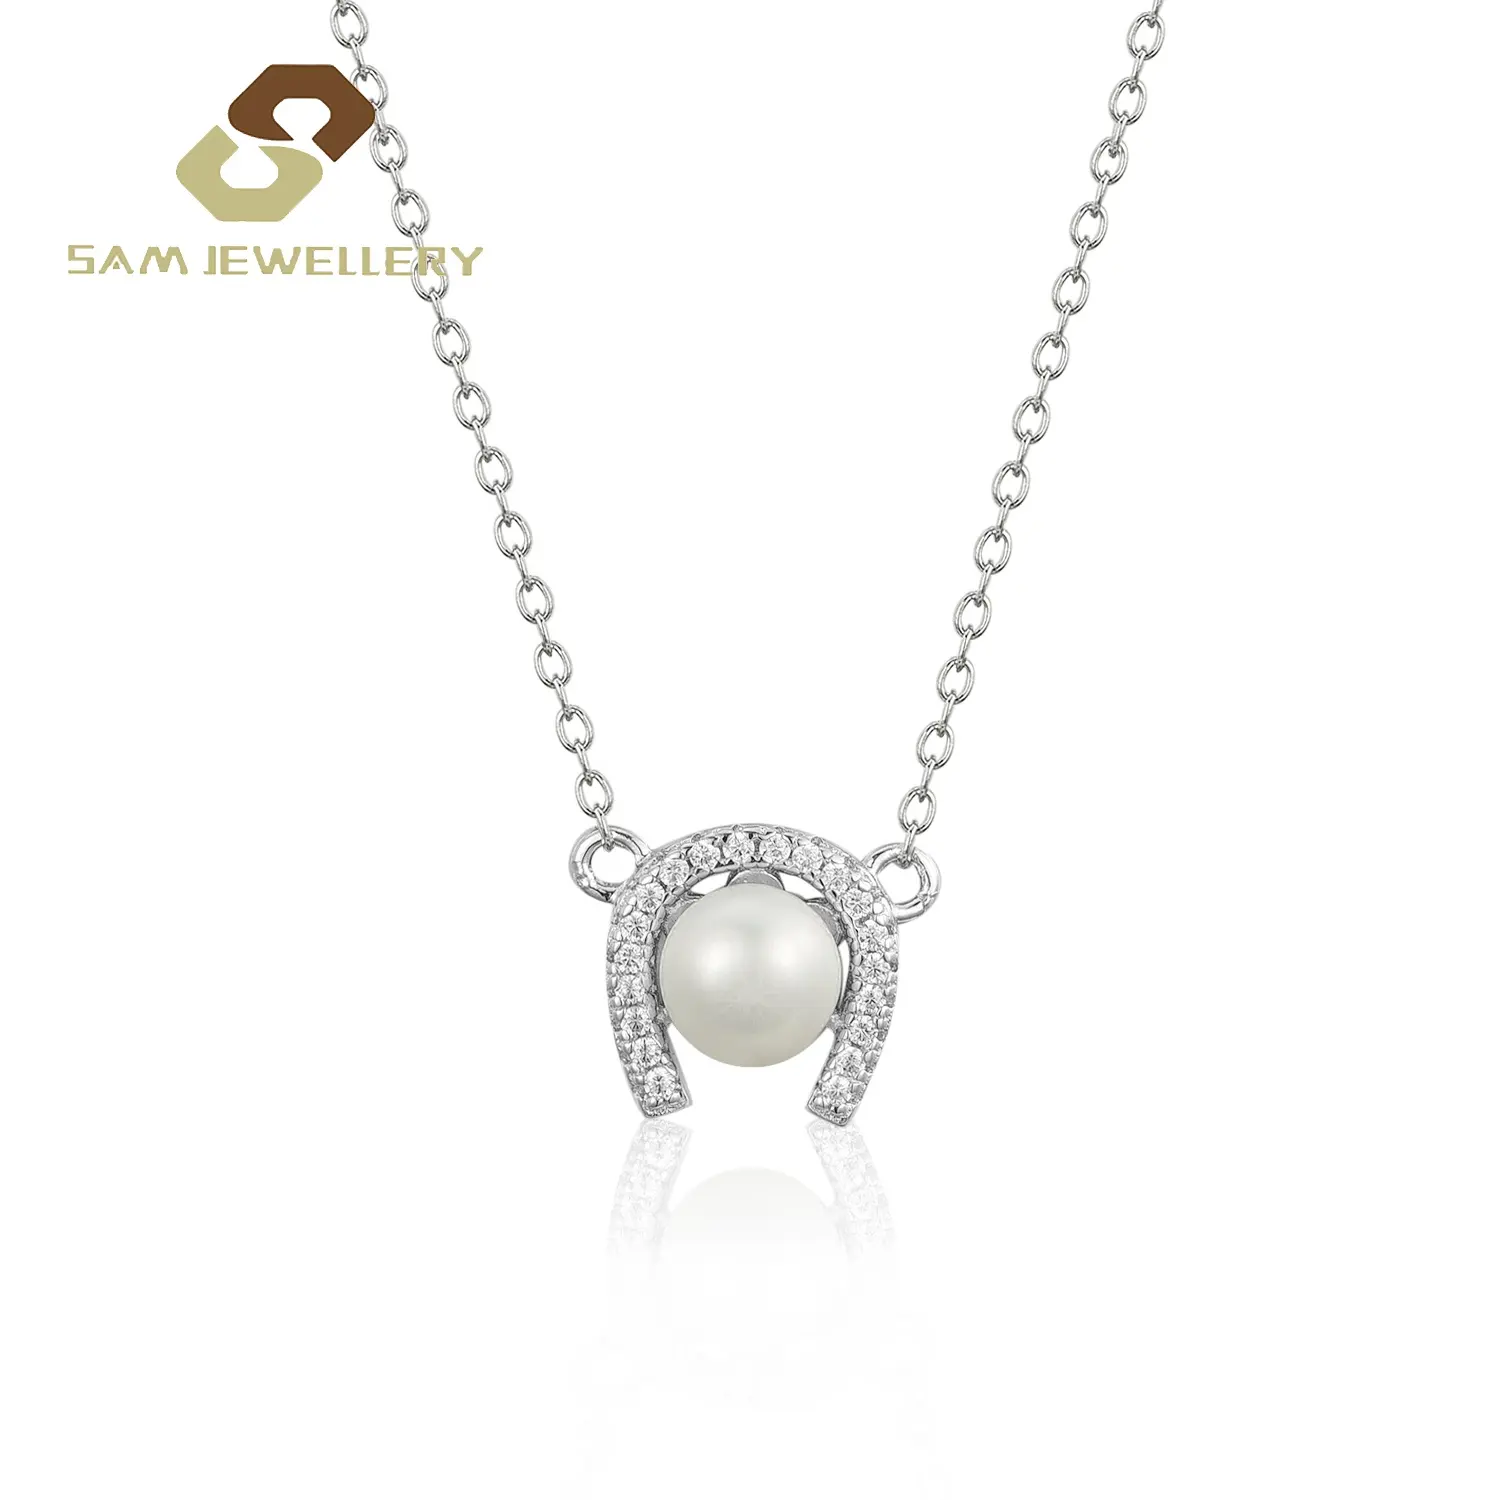 Fine Pearl Jewelry Trendy U Shaped 925 Sterling Silver Zircon Paved With White Freshwater Pearl Pendant Necklace For Women Gift